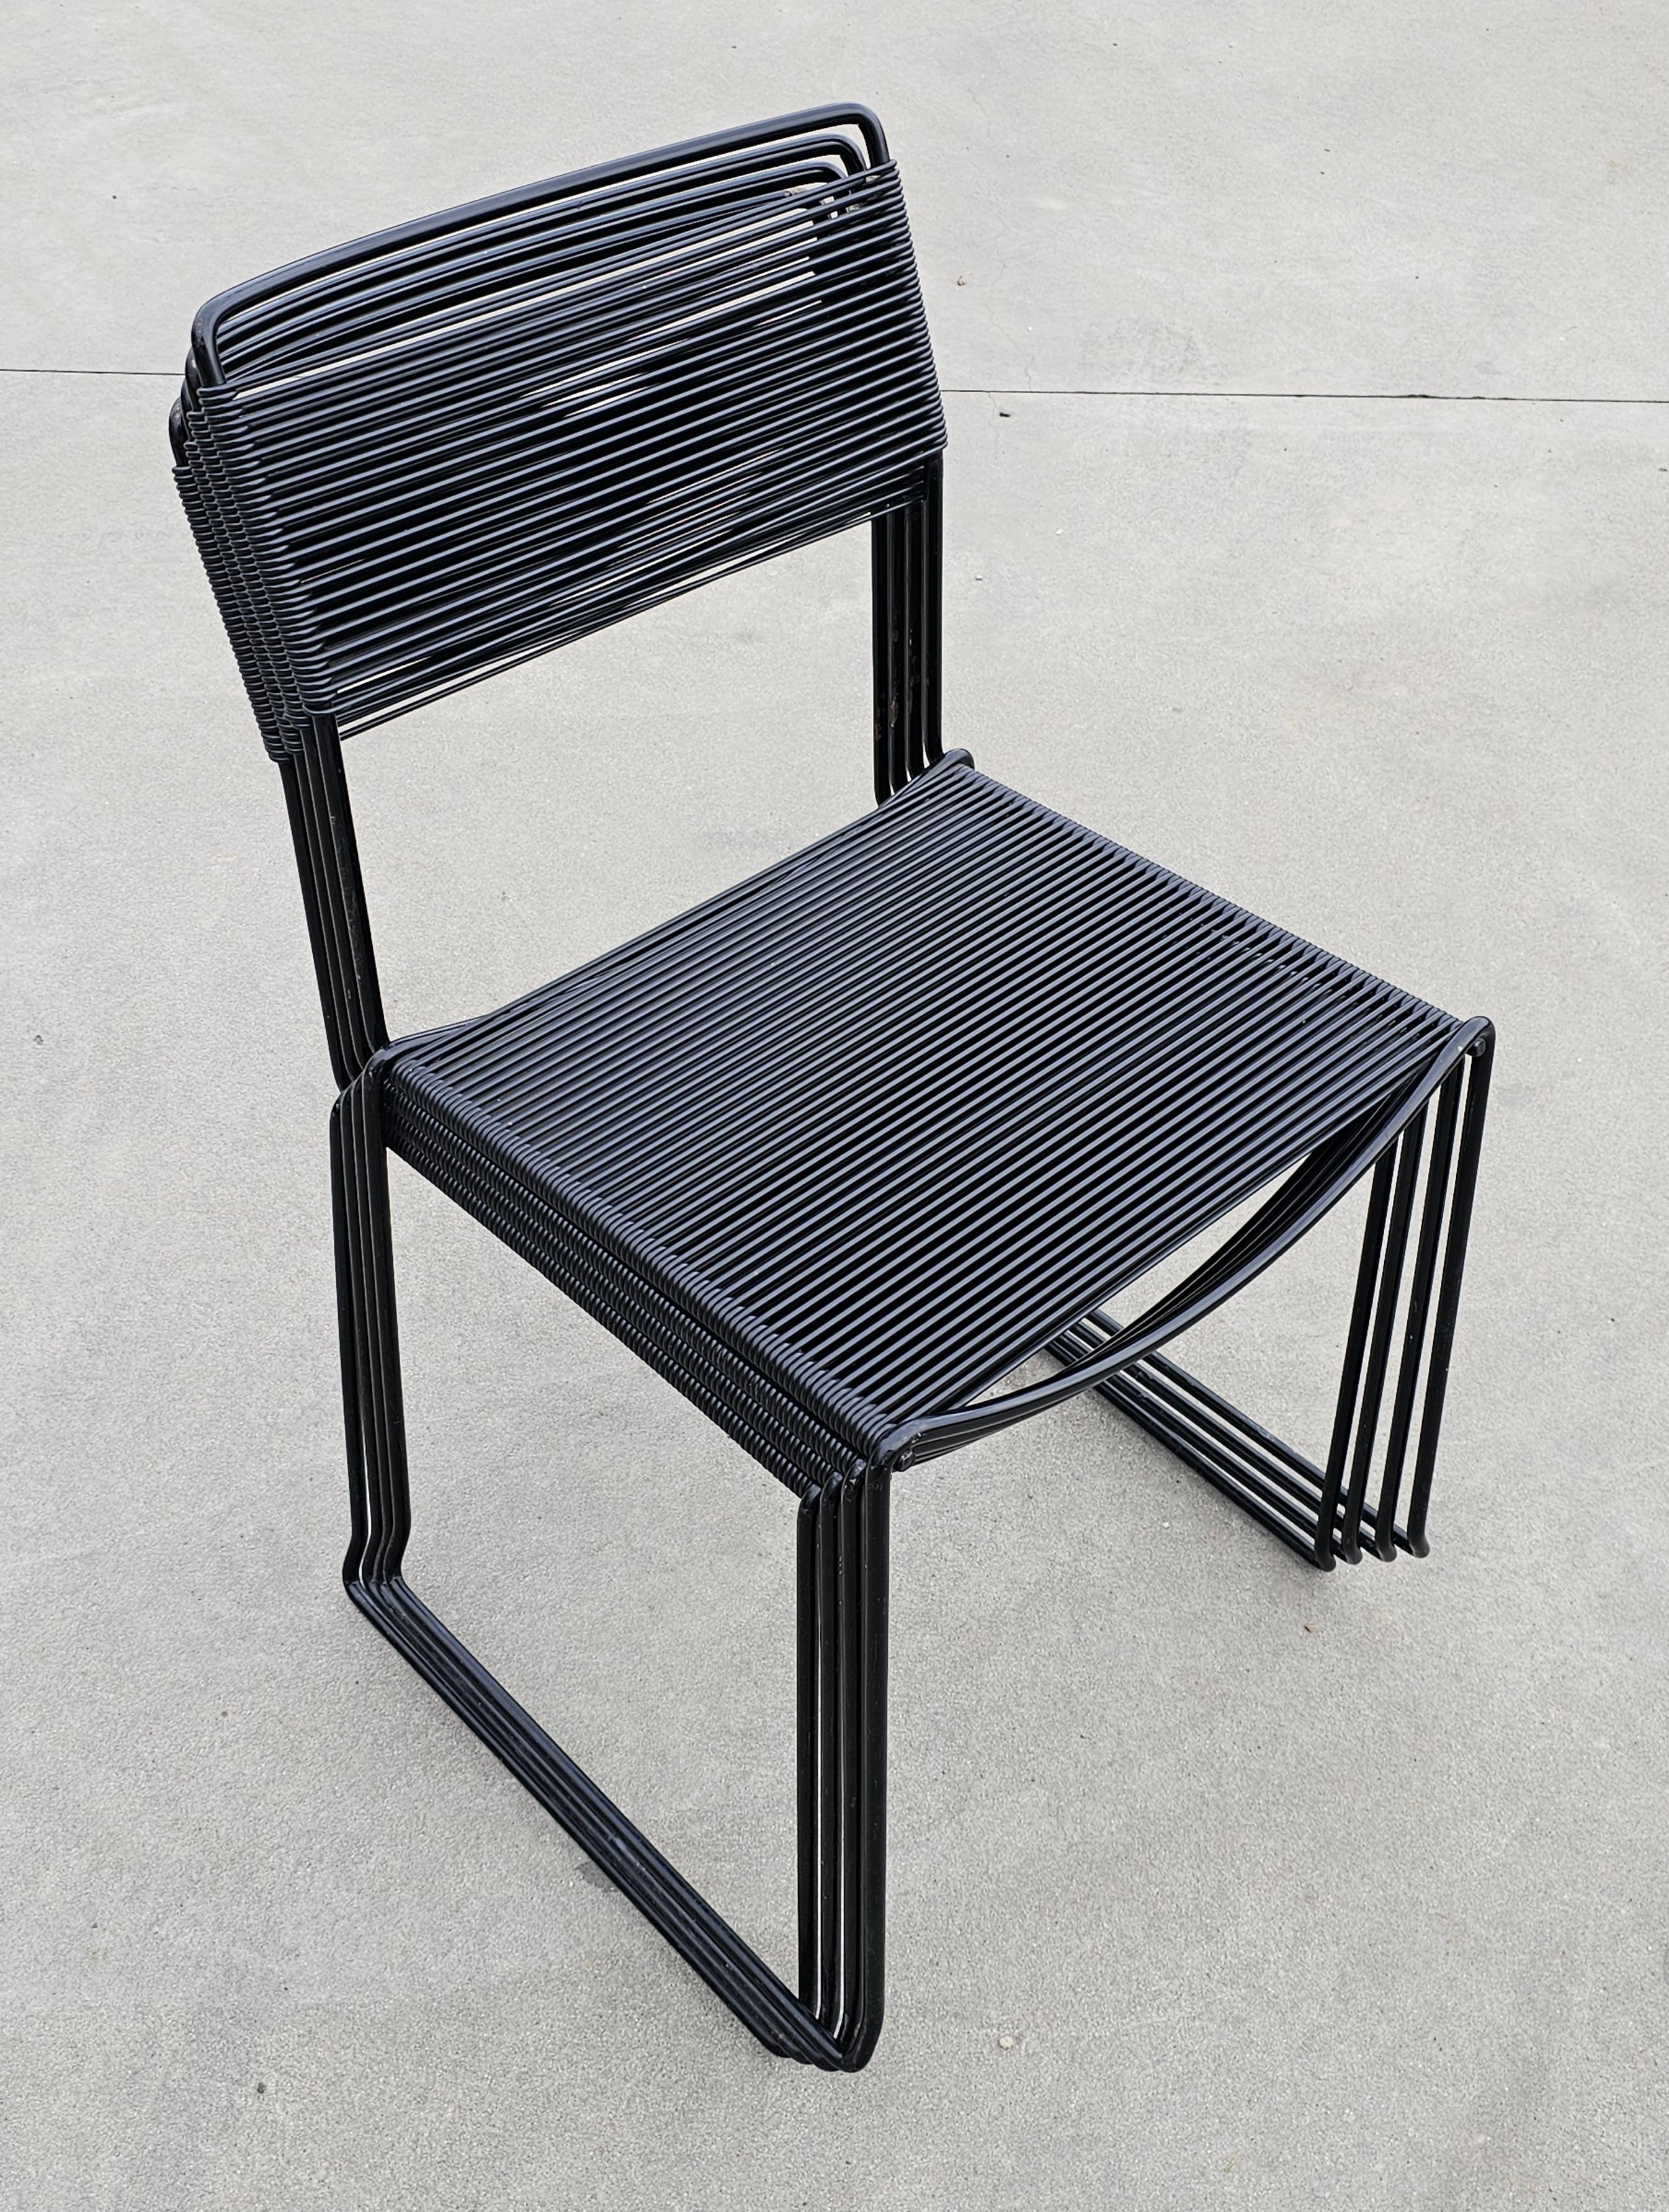 In this listing you will find 4 postmodern black dining chairs called Spaghetti, due to their PVC threaded seats and backrests. The chairs were designed by Giandomenico Belotti for Alias in 1970s.

Good vintage condition with some signs of time and